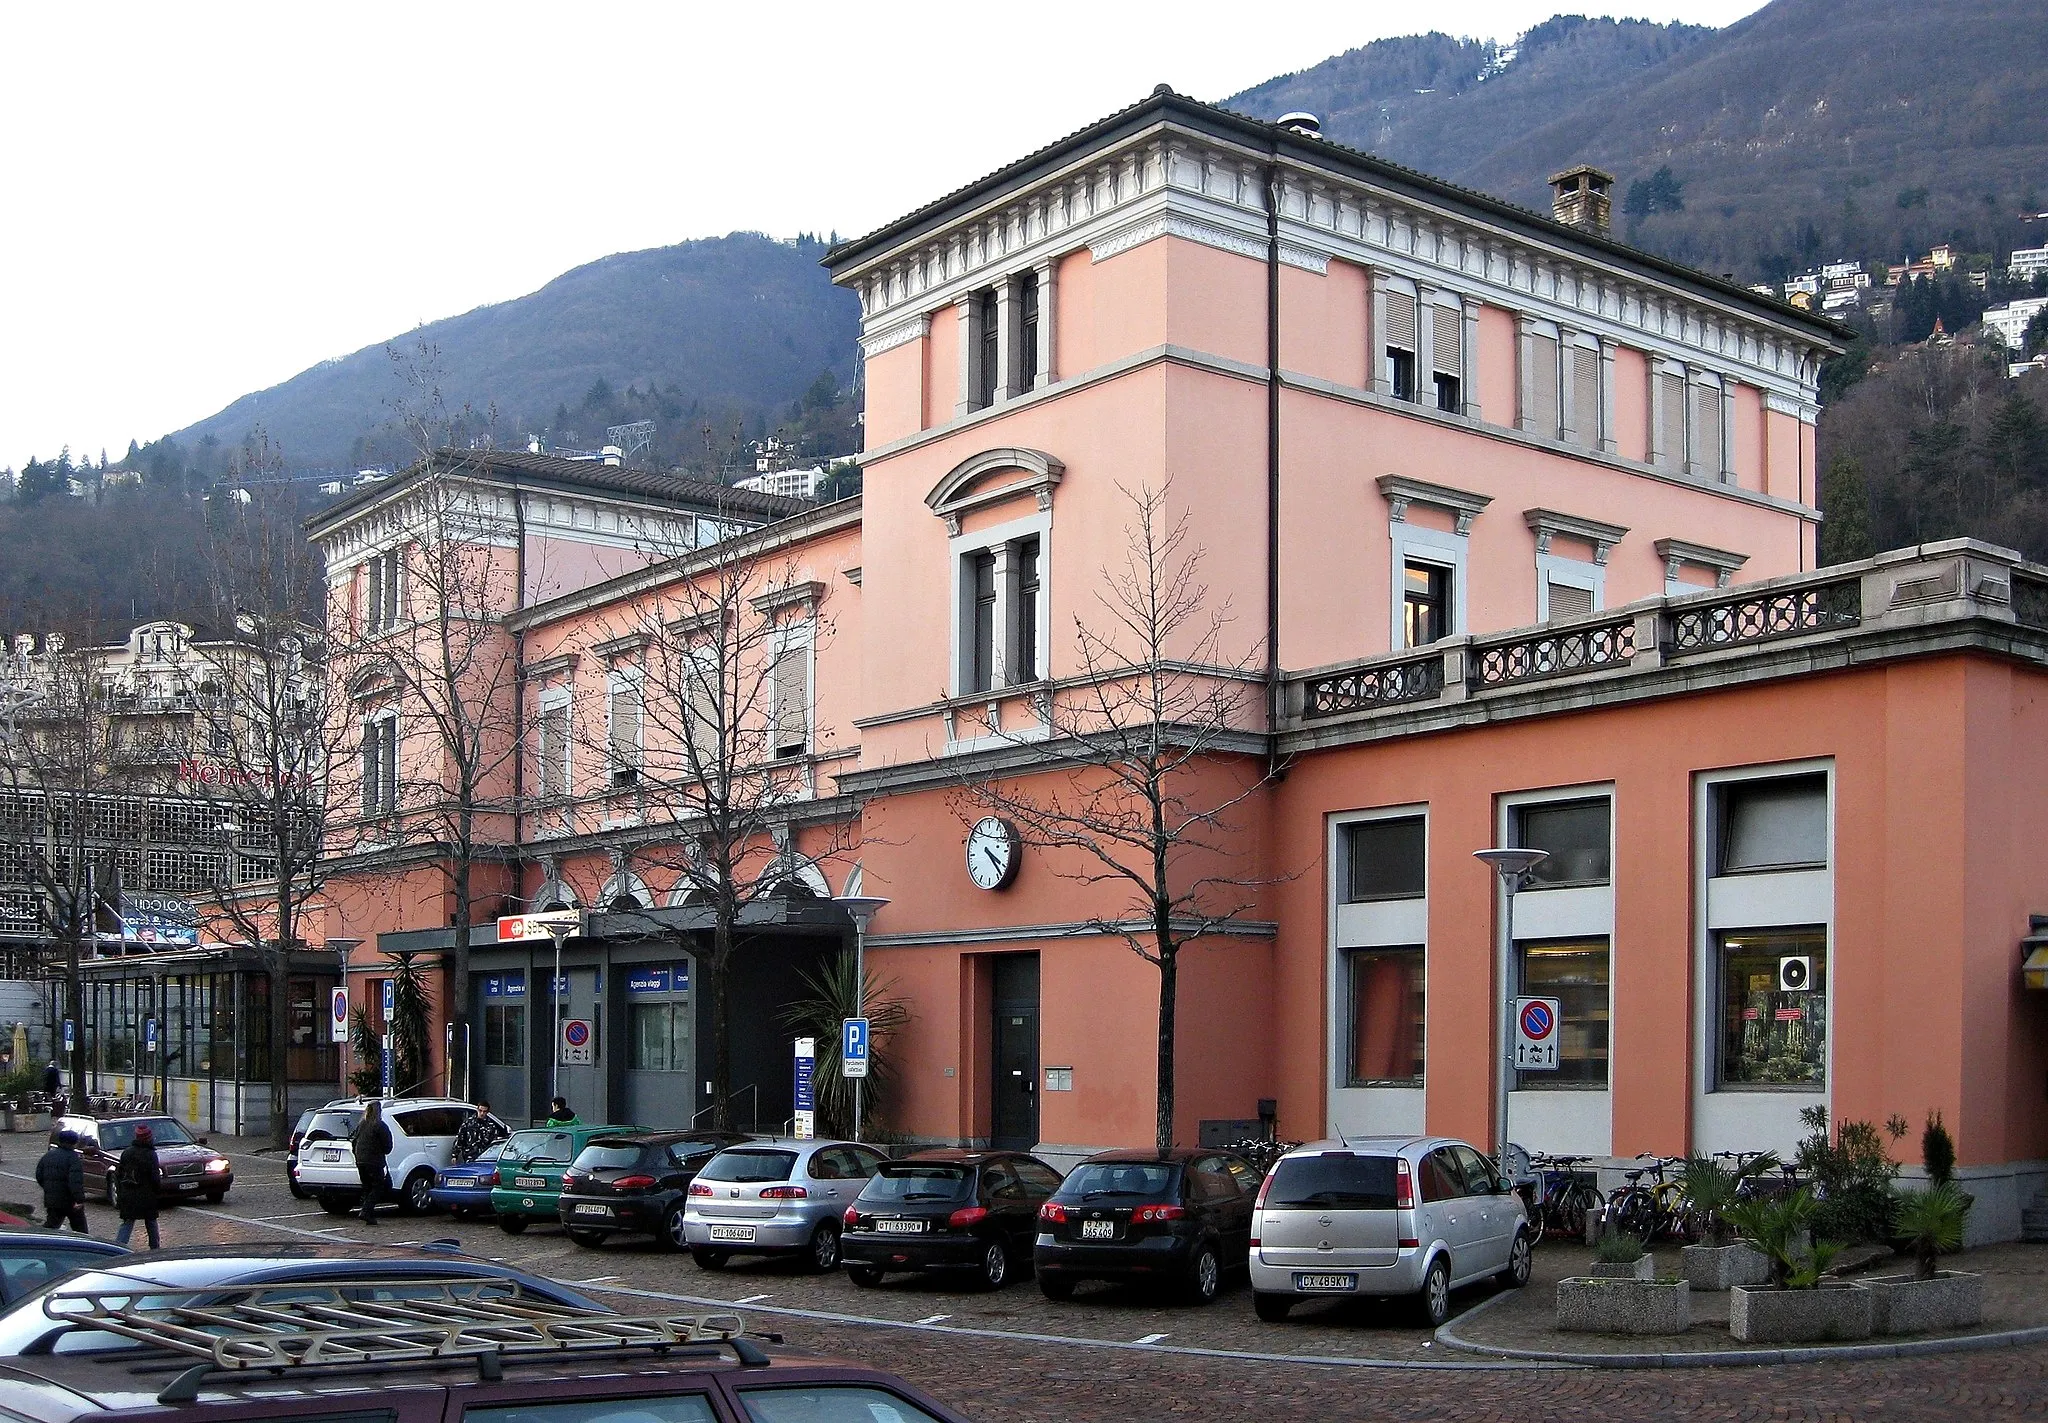 Photo showing: Entrance building of railway station in Locarno/Switzerland